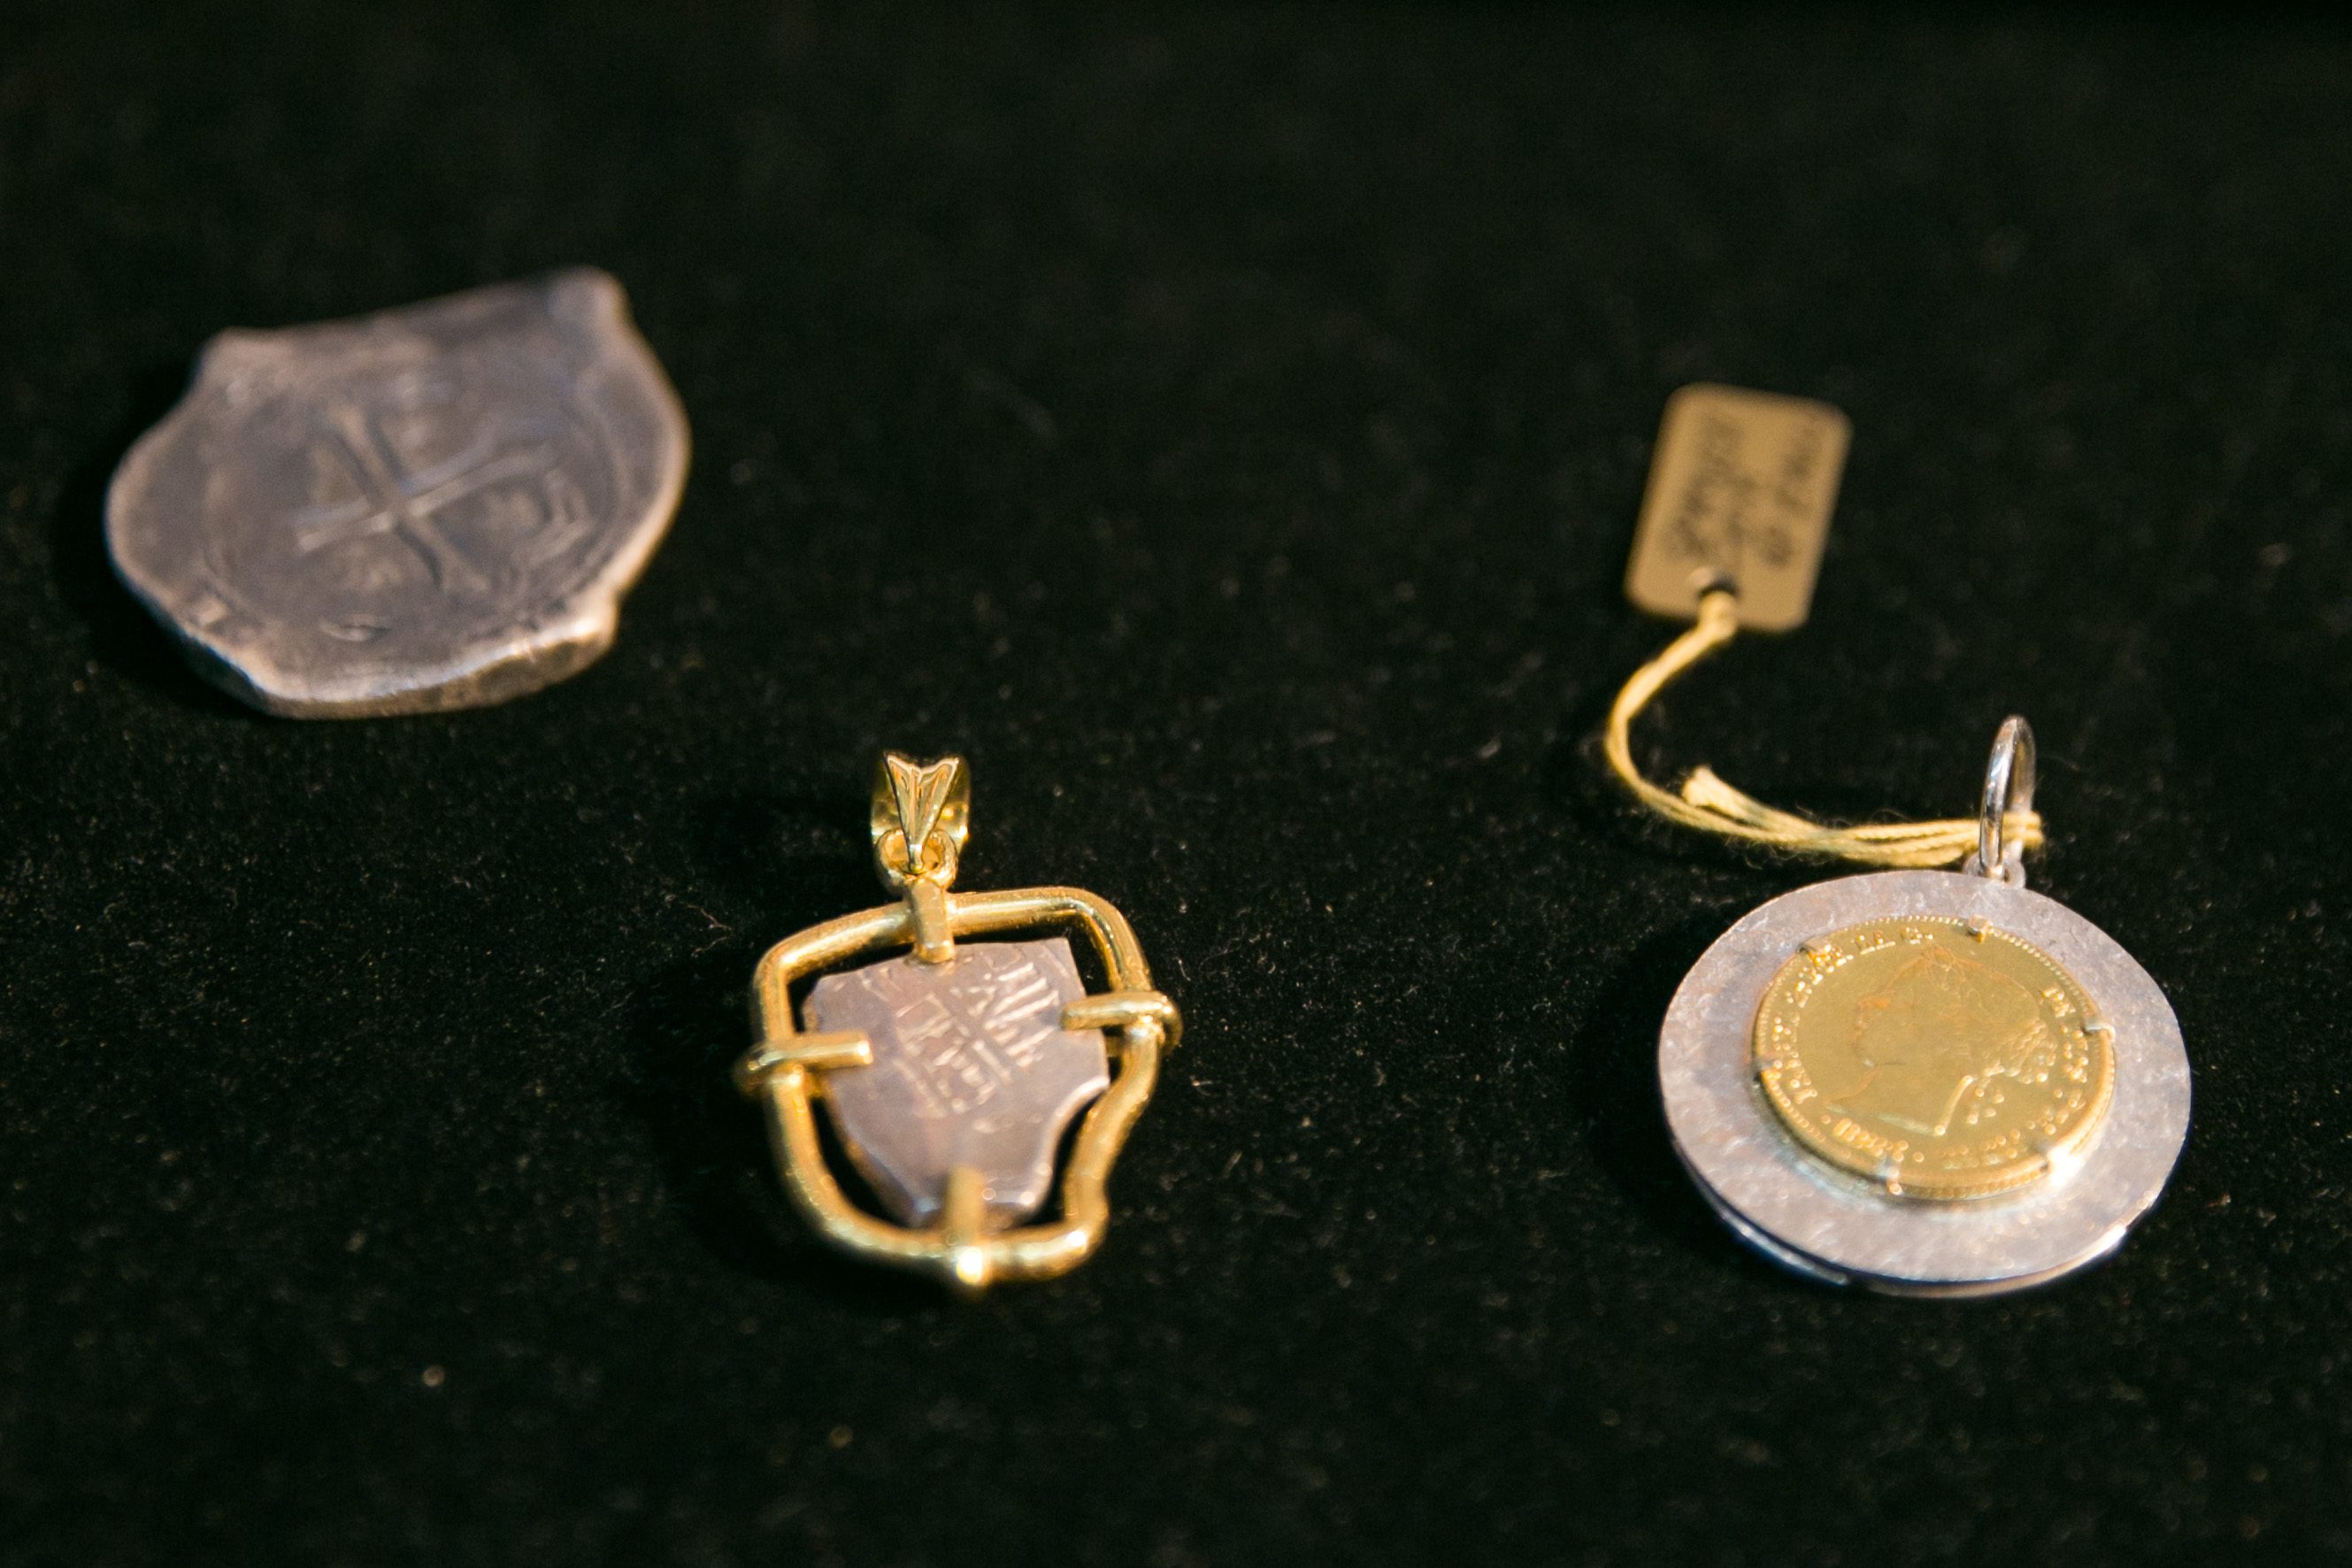 ANTIQUE COINS. Hilis Kalamays (left) are coins used during the Galleon Trade. In the center is a hilis kalamay that Maria Angelica turned into a pendant. Photo by Pat Nabong/Rappler